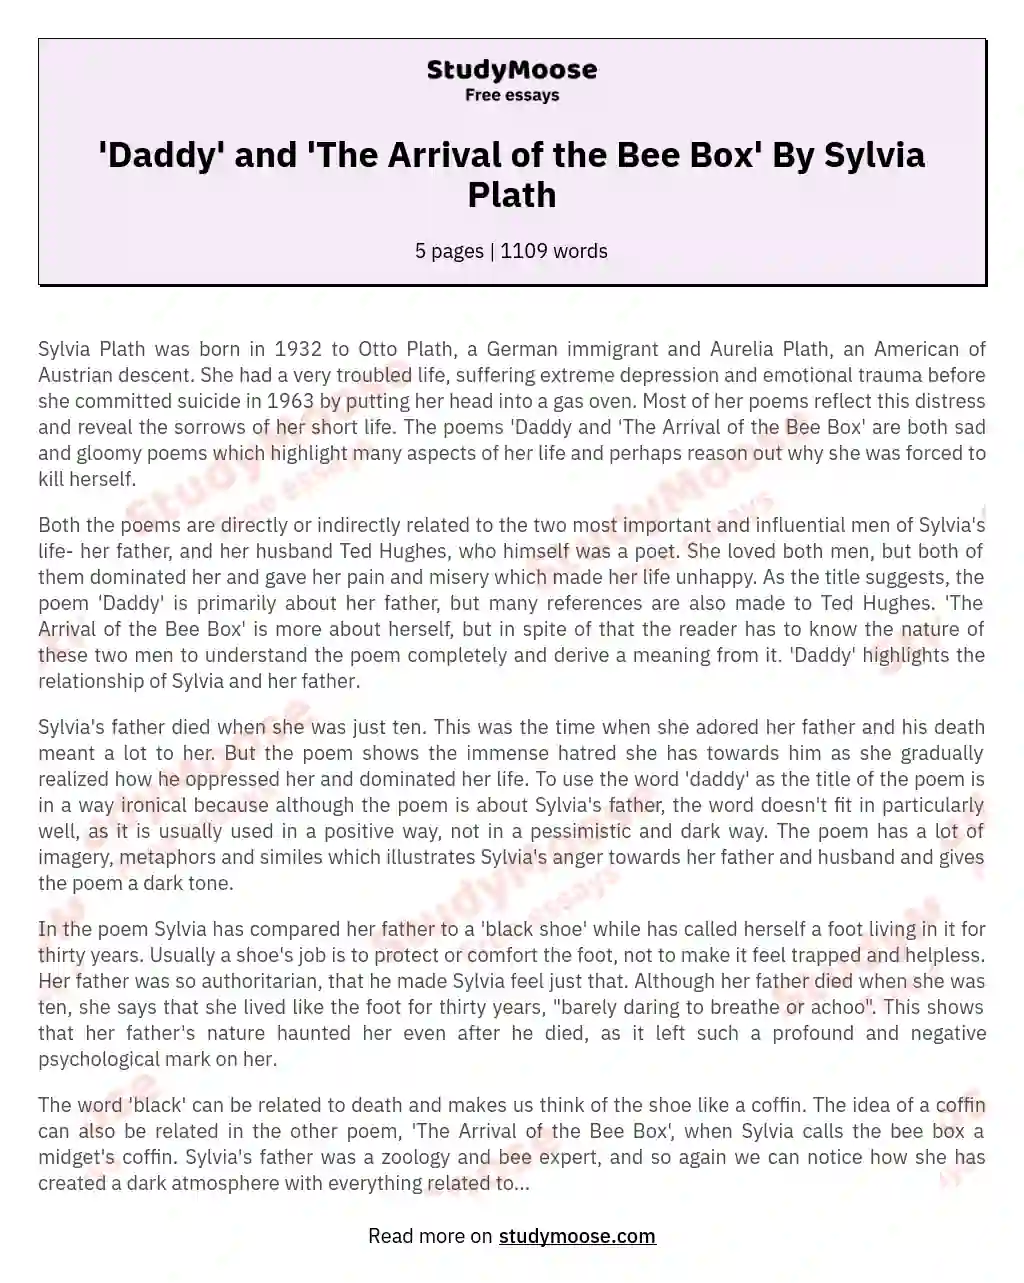 'Daddy' and 'The Arrival of the Bee Box' By Sylvia Plath